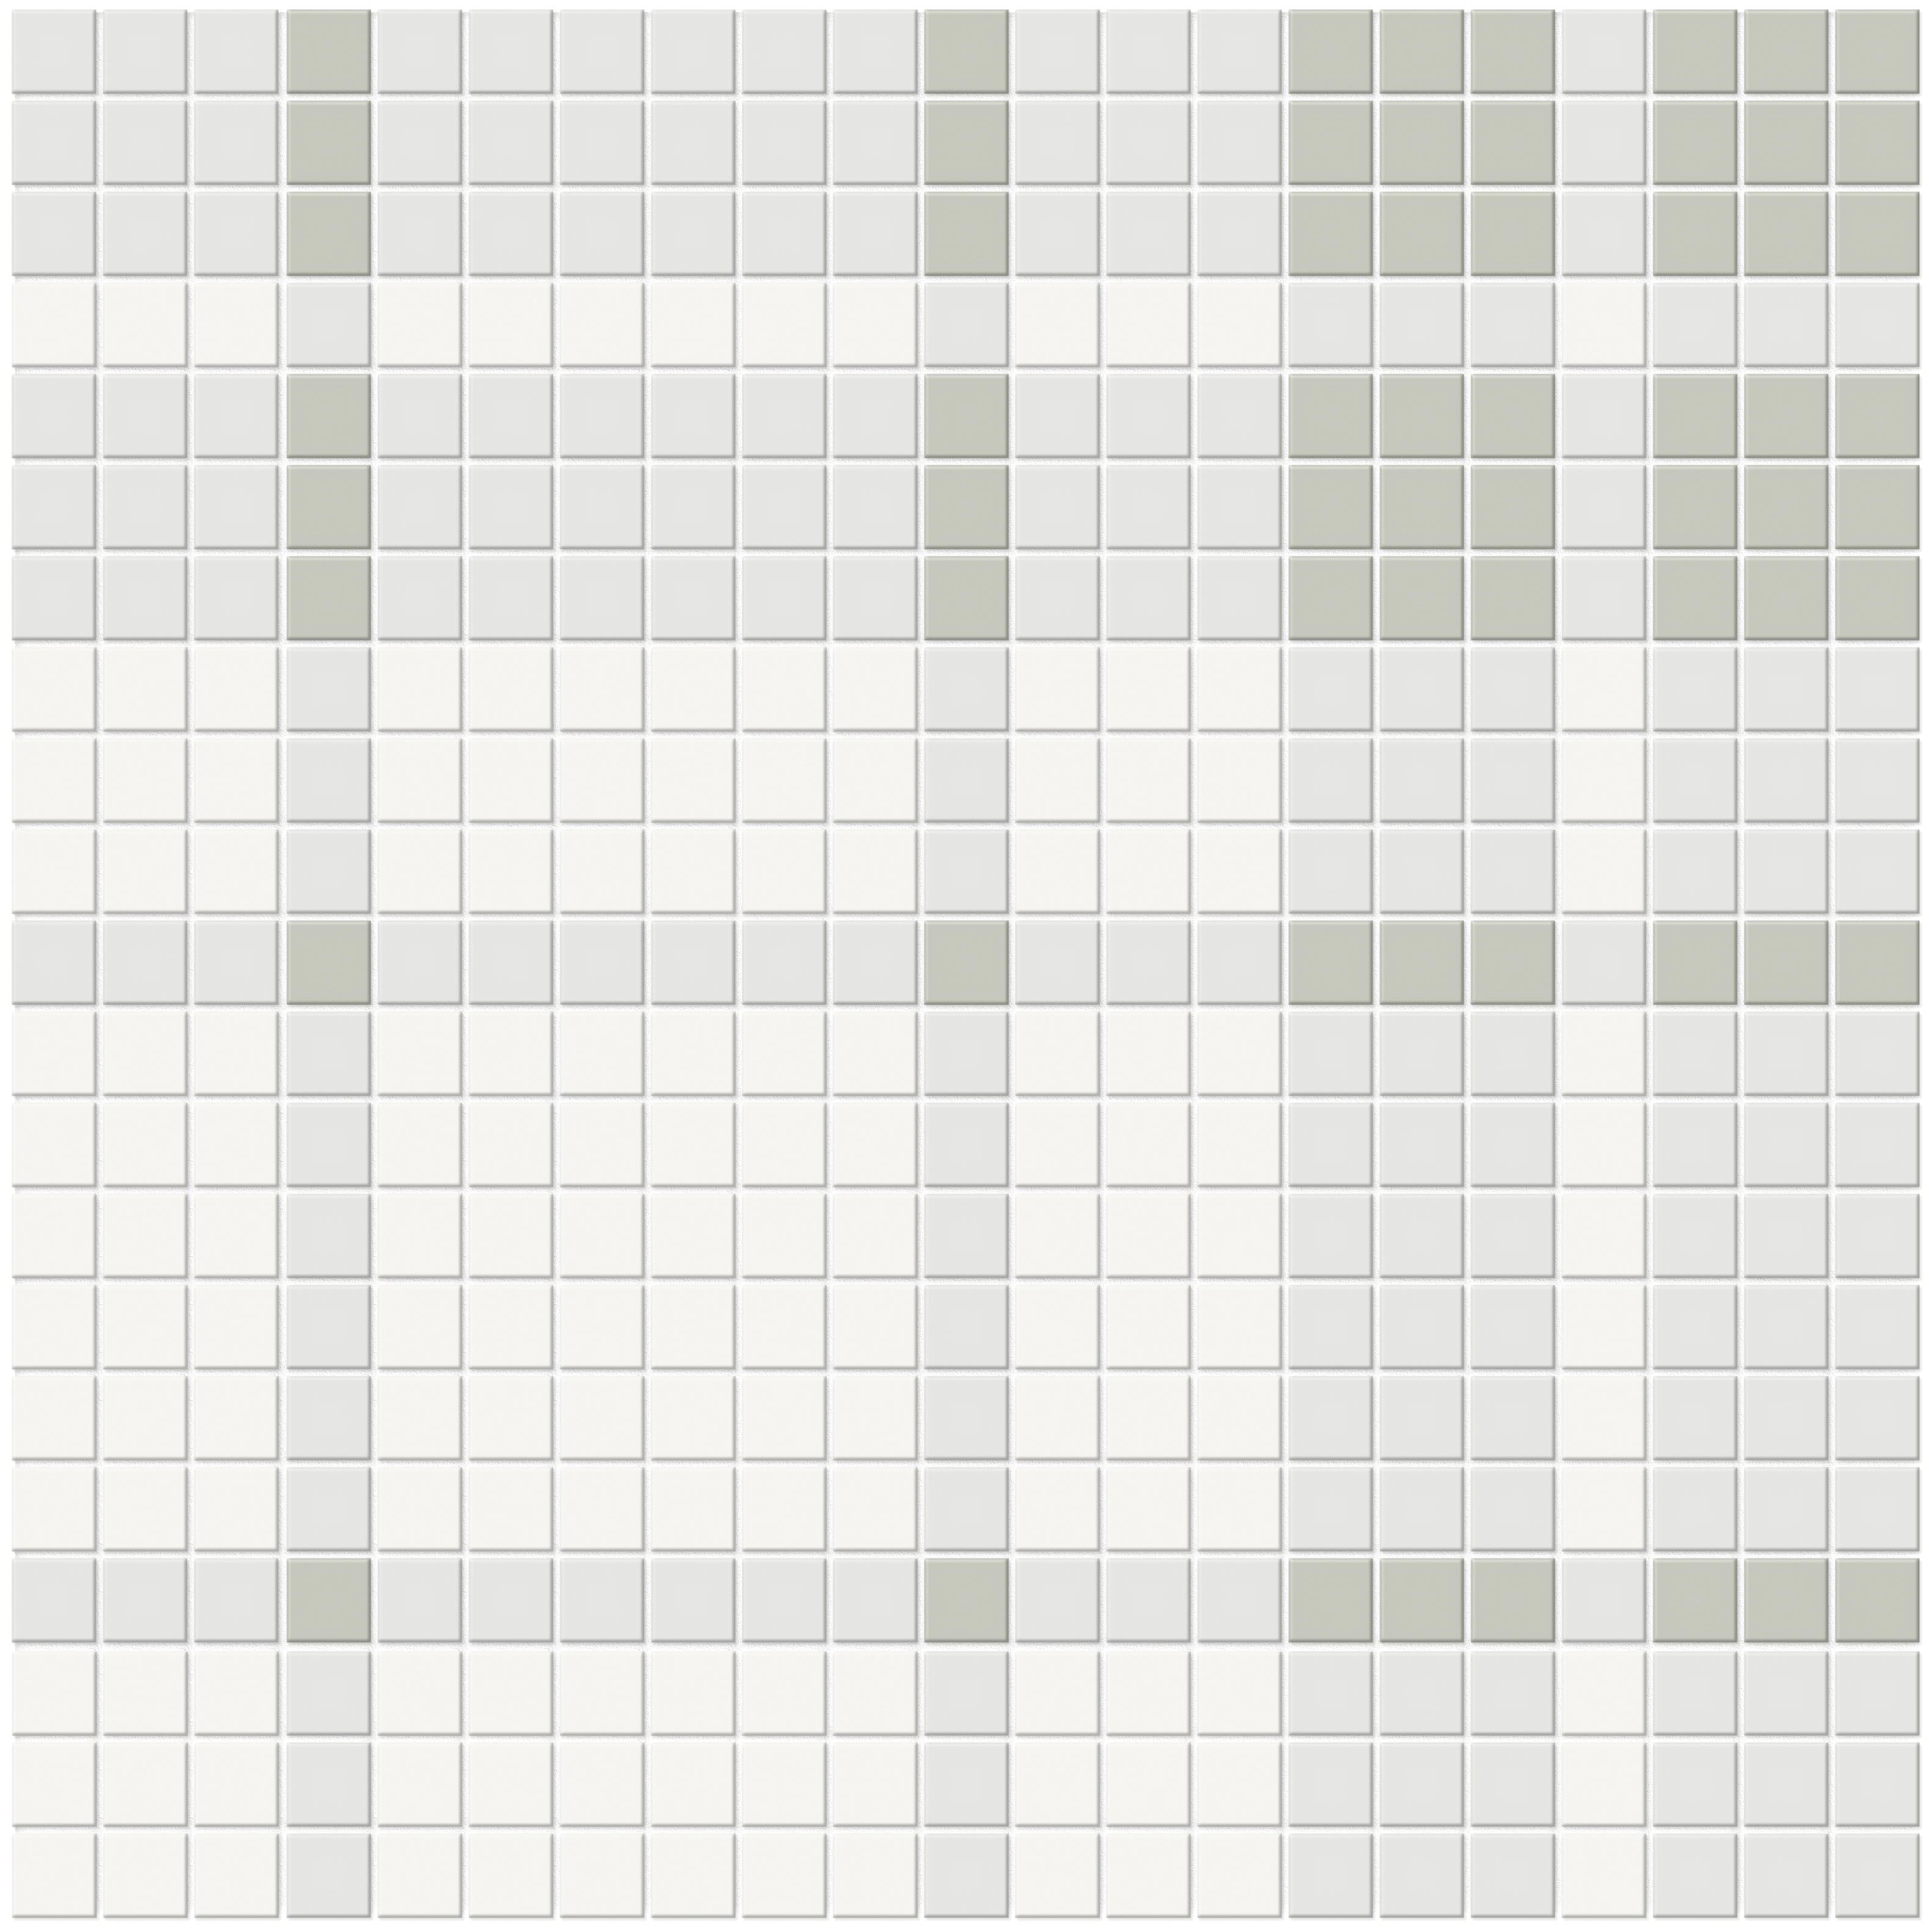 morning plaid pattern glazed porcelain mosaic print blend from soho anatolia collection distributed by surface group international matte finish pressed edge mesh shape